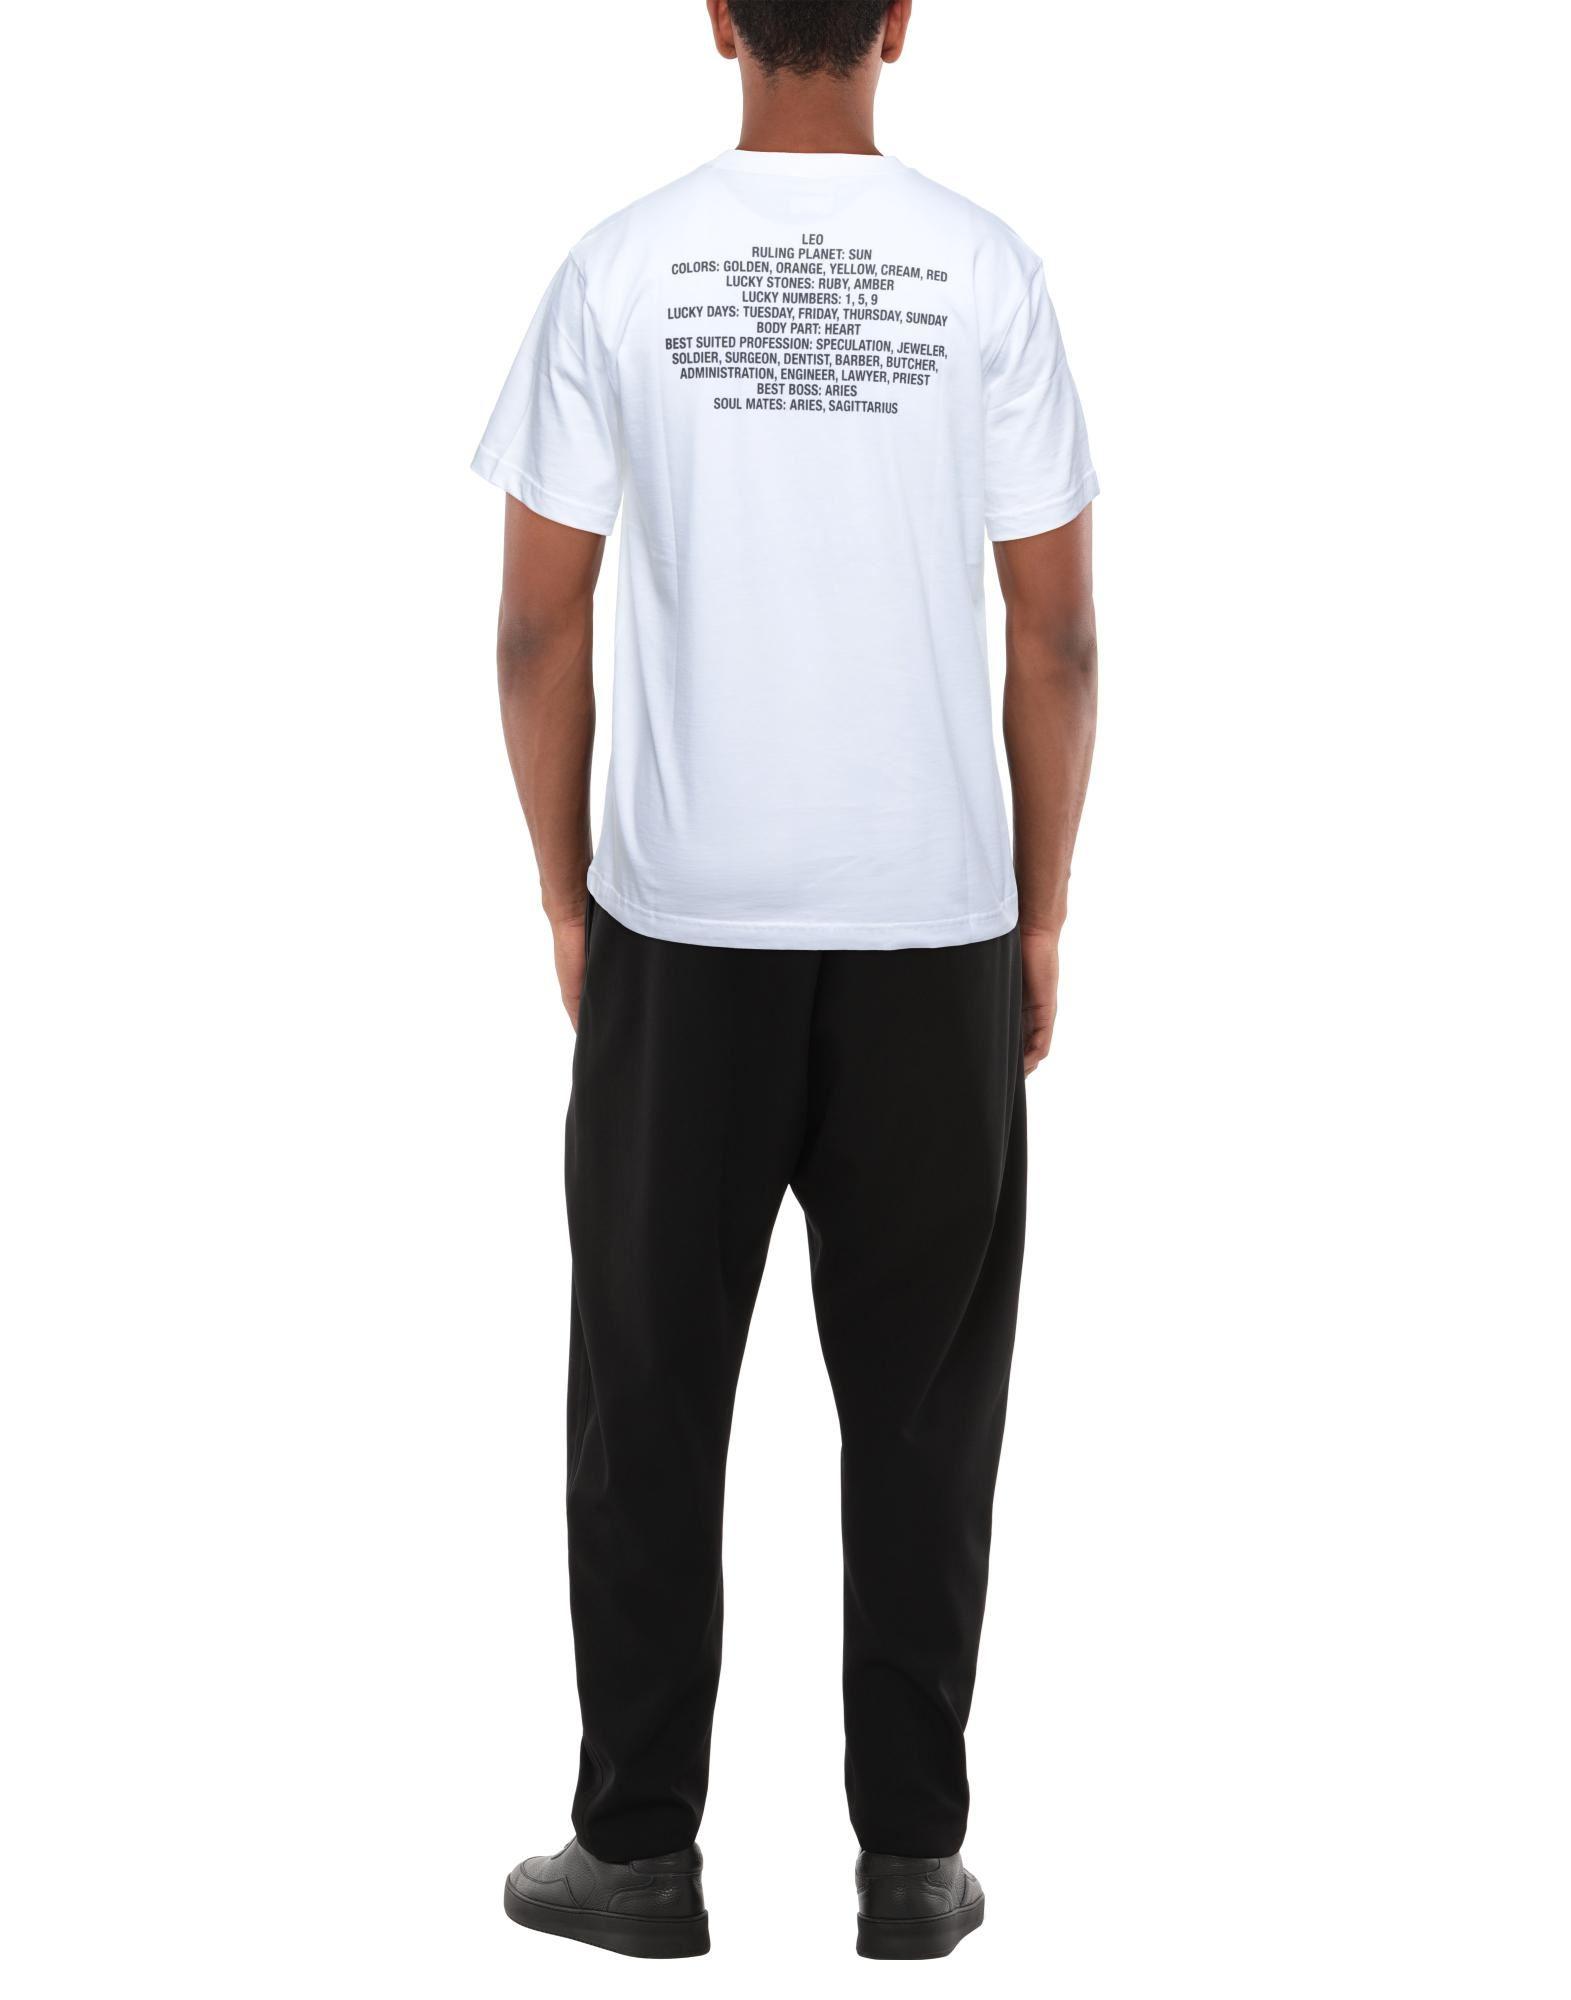 Vetements Cotton T-shirt in White for Men - Lyst